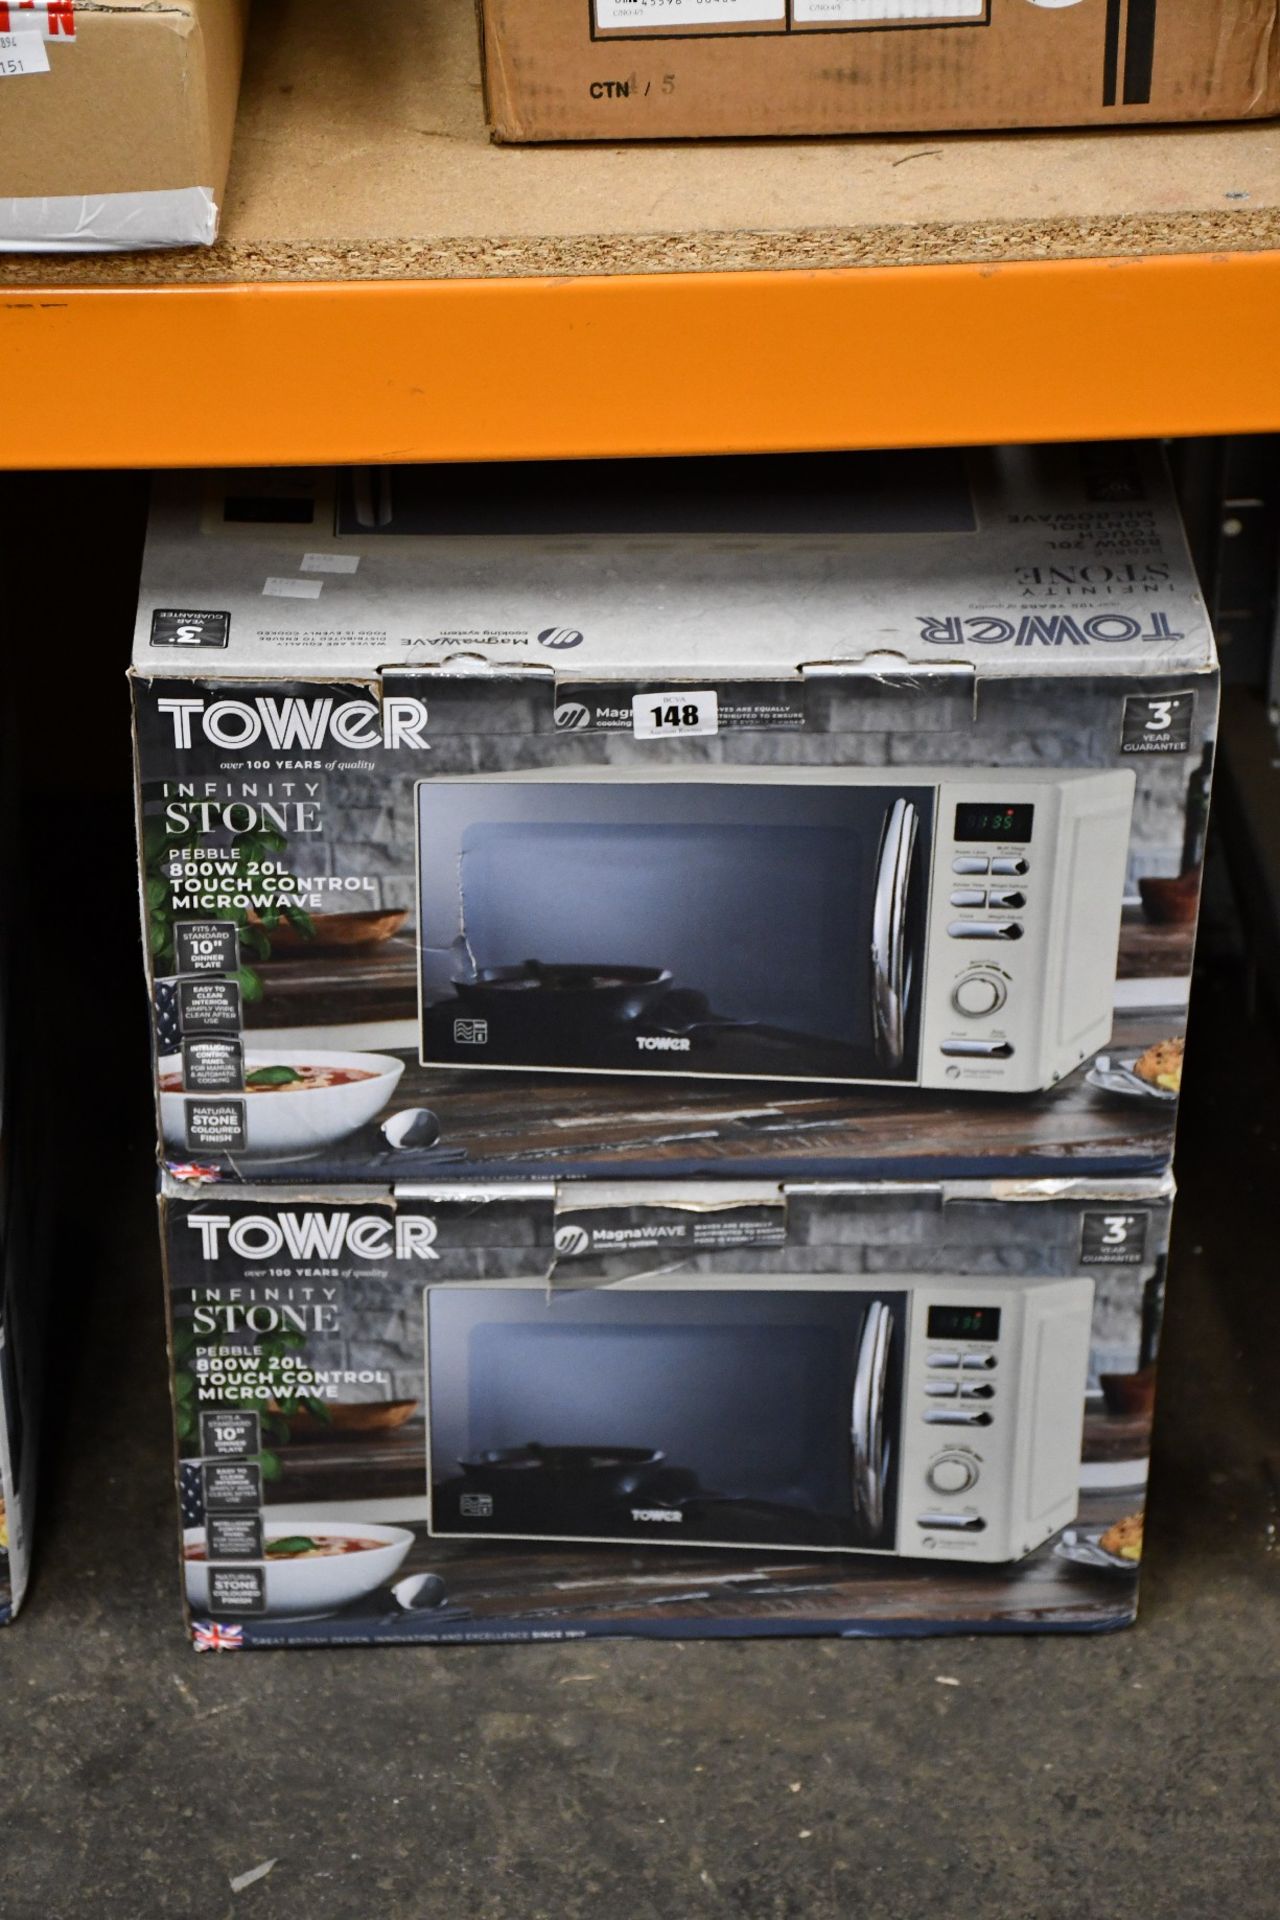 Two Tower Infinity Stone - Pebble 800W Touch Control Microwaves.